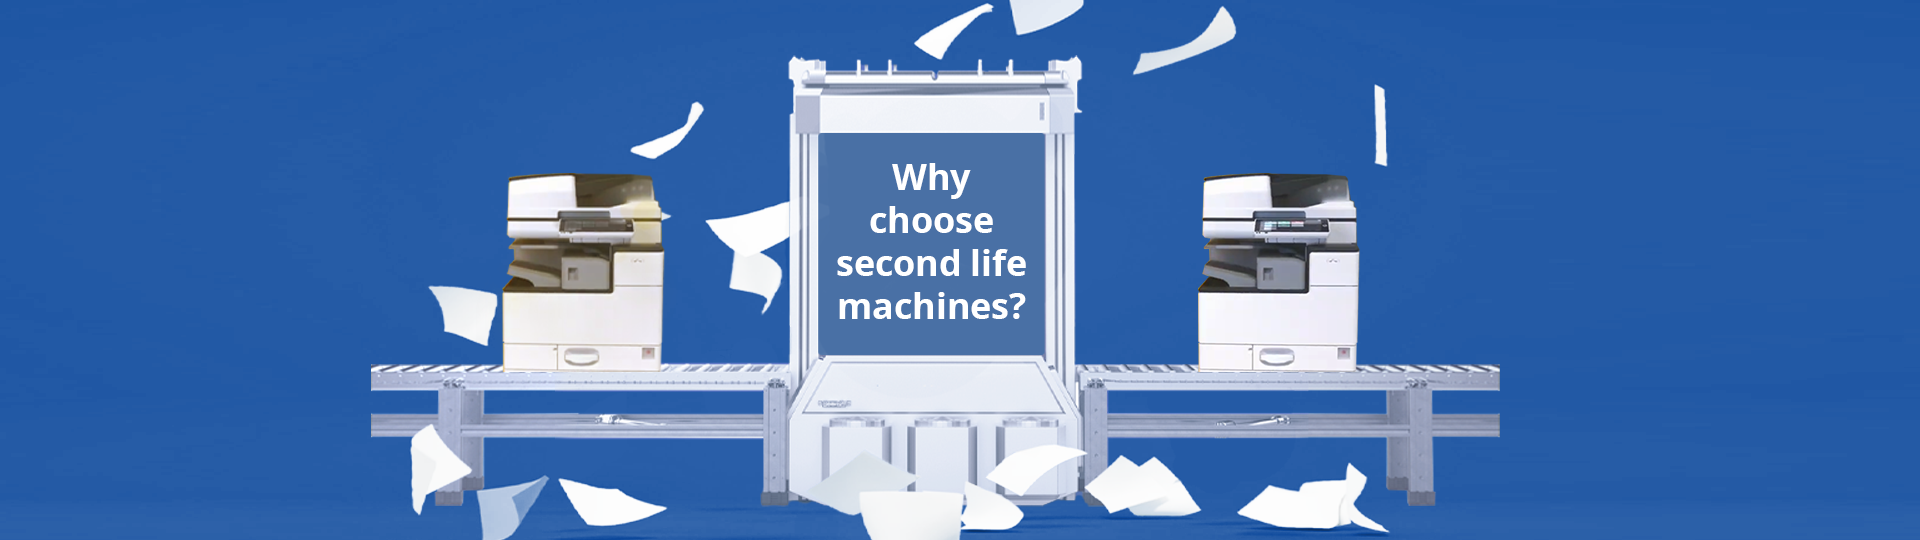 Why choose second life machines?